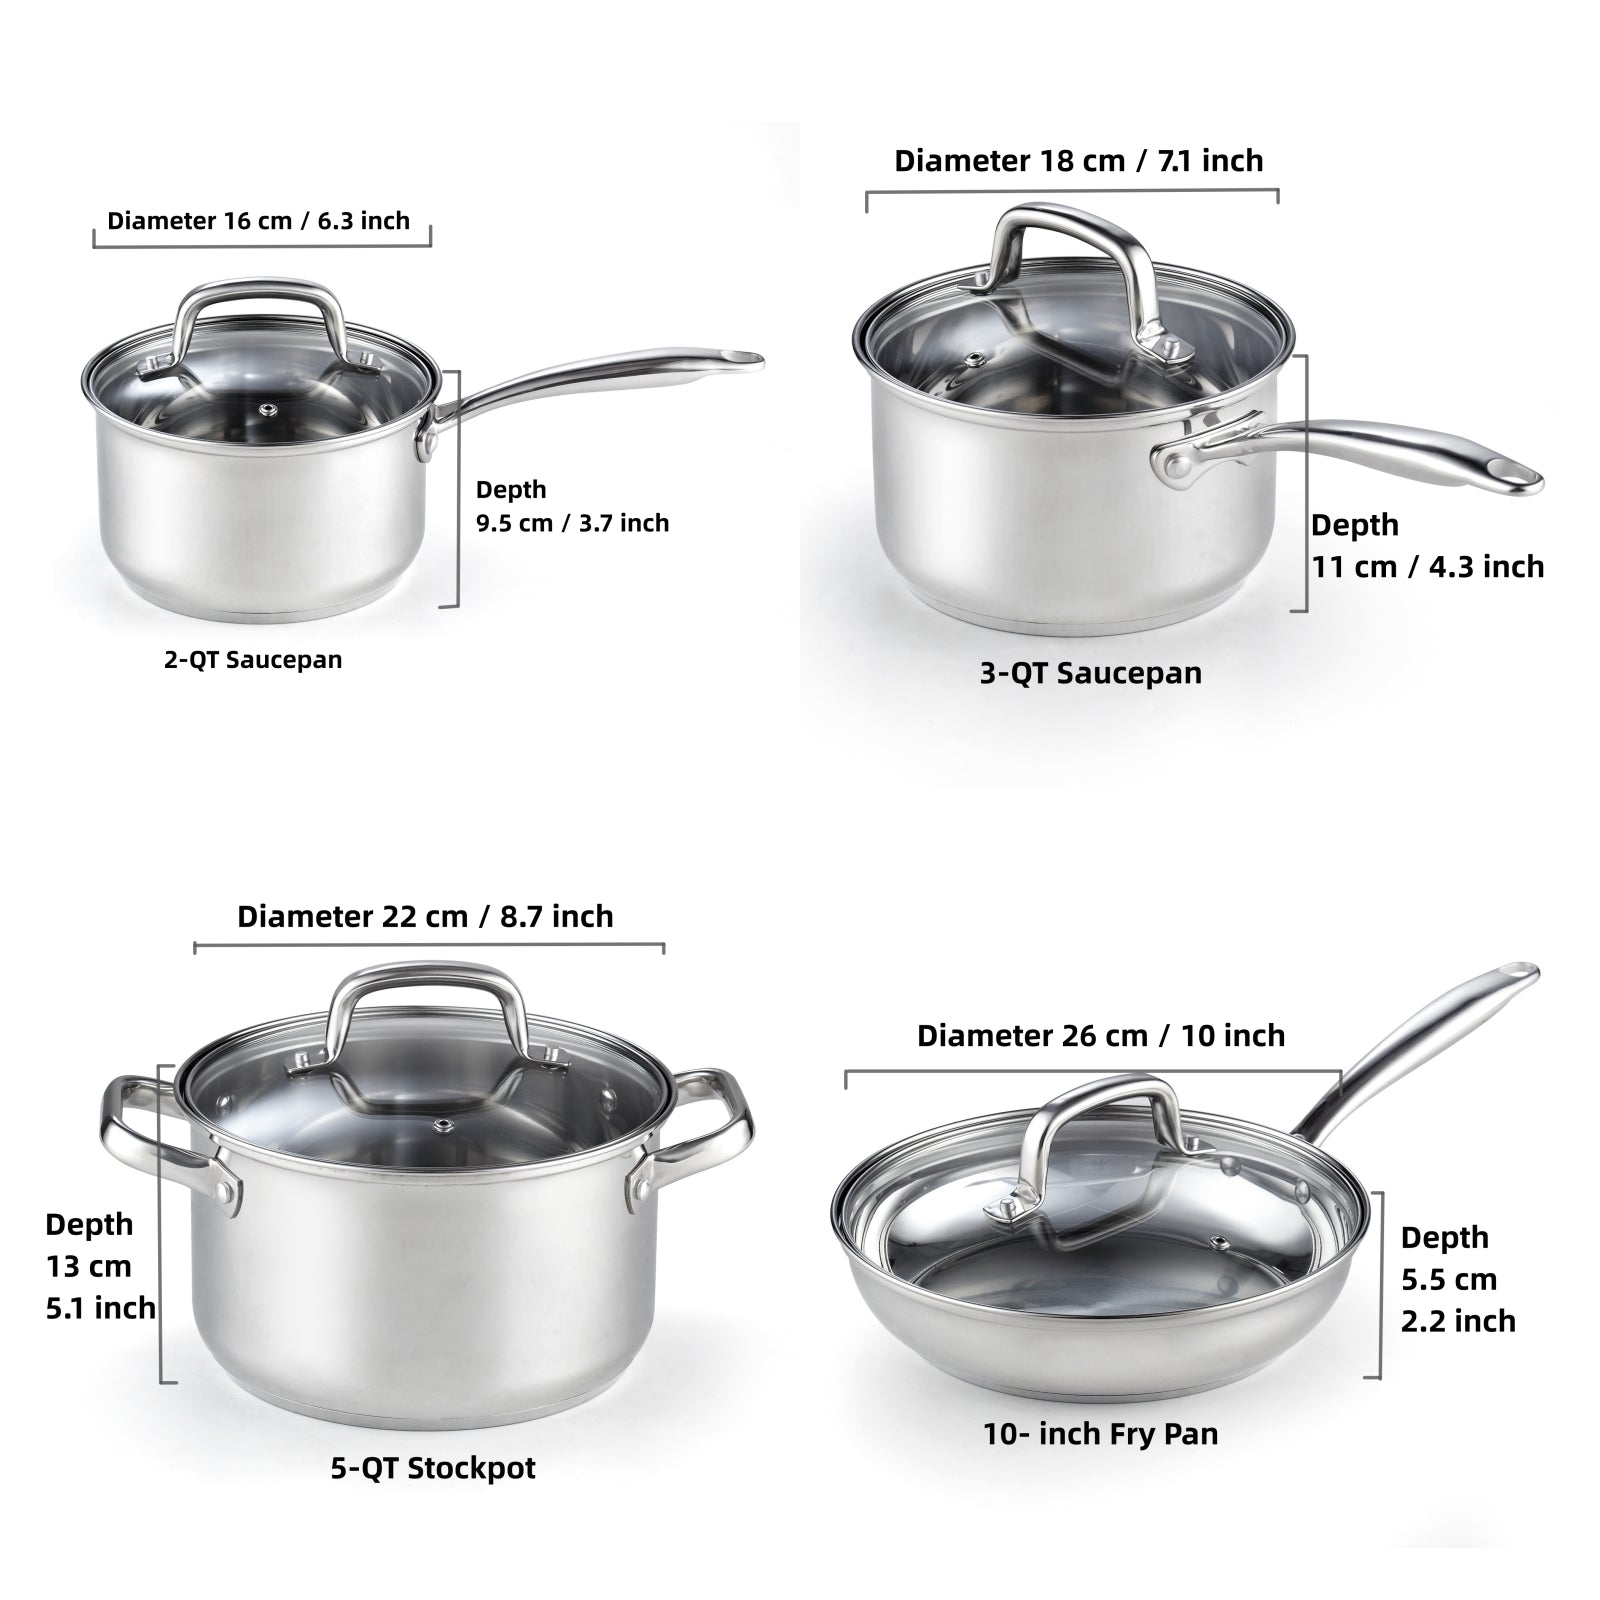 CLASSIC INDUCTION 10-Piece Cookware Set